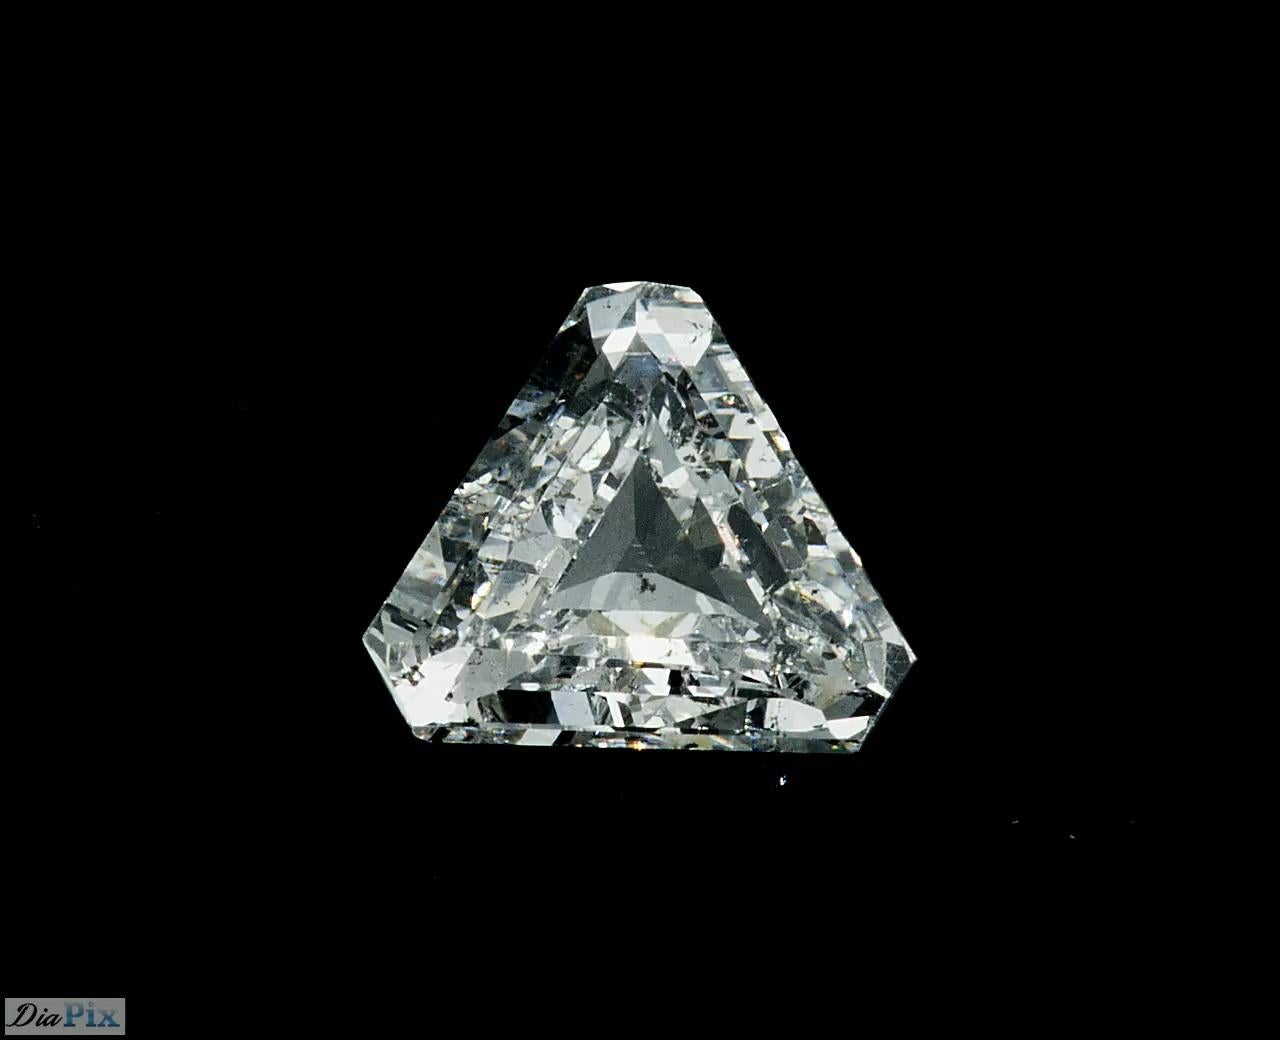 Please revise all the details, photos, videos, and certificate carefully and familiarize yourself with our KYC Policy, below.

Every diamond we offer has a captivating story to tell and it takes over 200 tons of ore to yield just one carat of